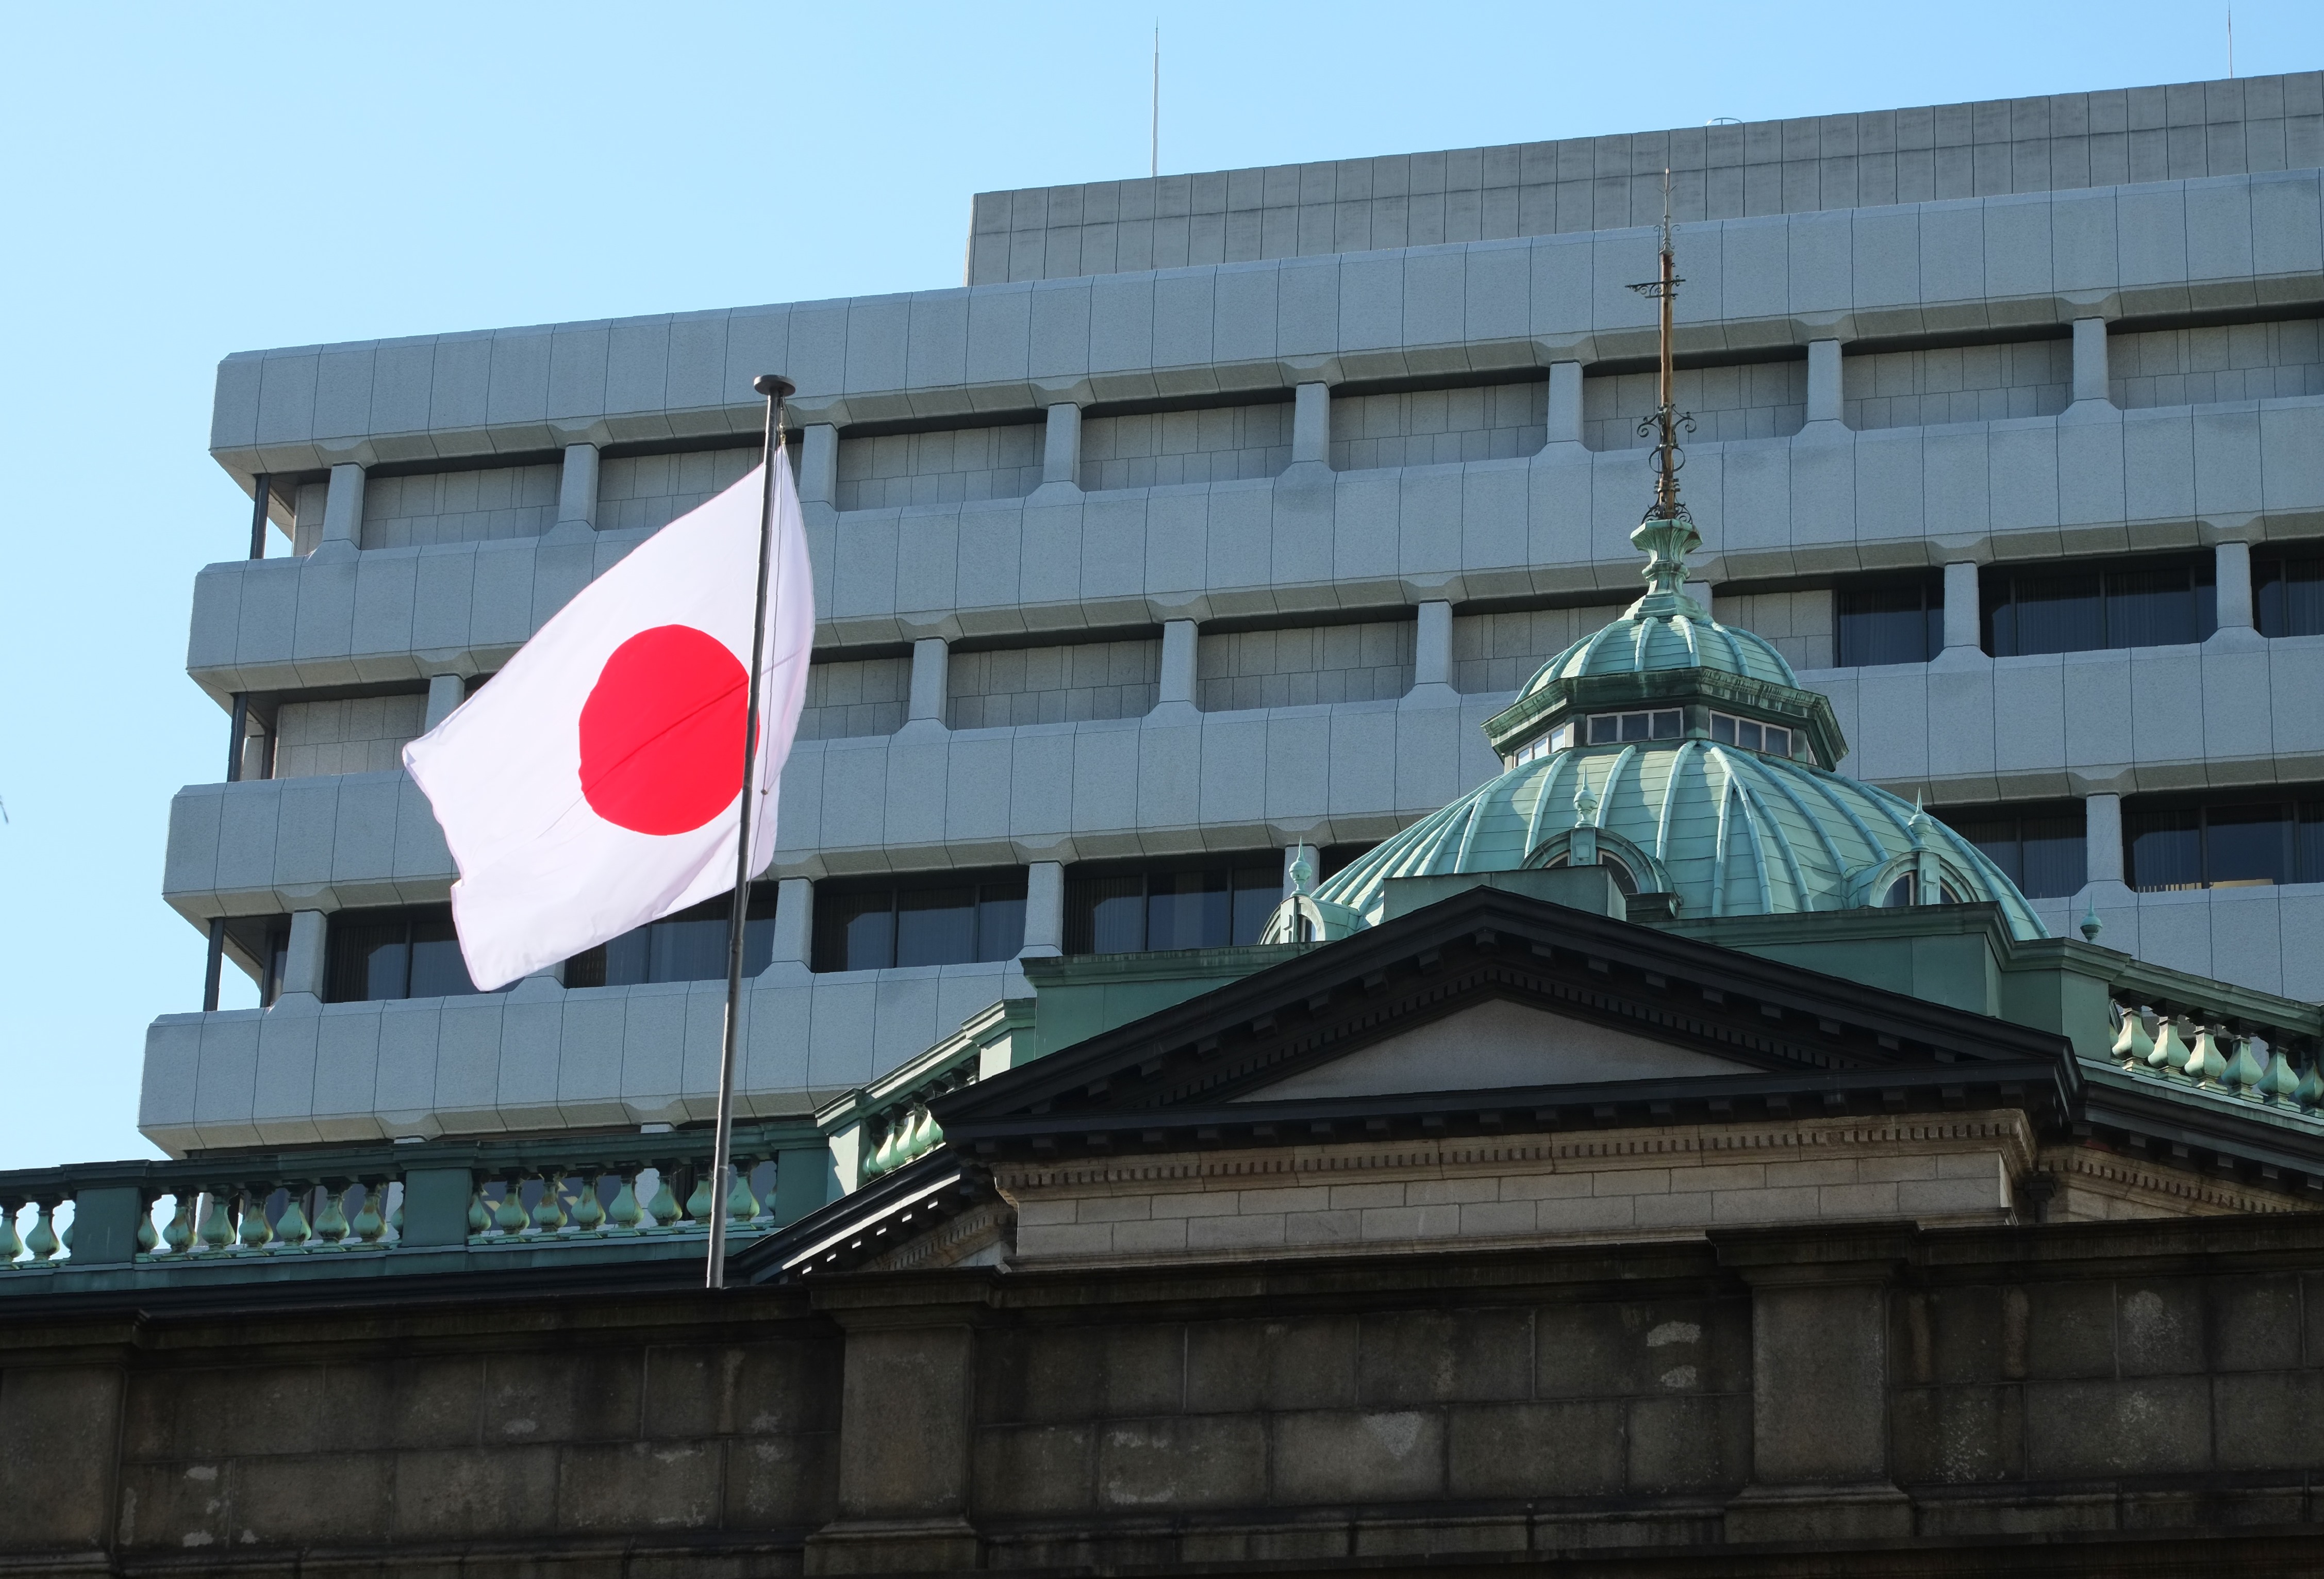 The Japanese national flag is seen on the Bank of Japan headquarters in Tokyo on July 29, 2016. Tokyo shares rose on July 29 with lenders boosted by the Bank of Japan's decision not to cut interest rates further into negative territory, which could have dented their profits. / AFP PHOTO / KAZUHIRO NOGI